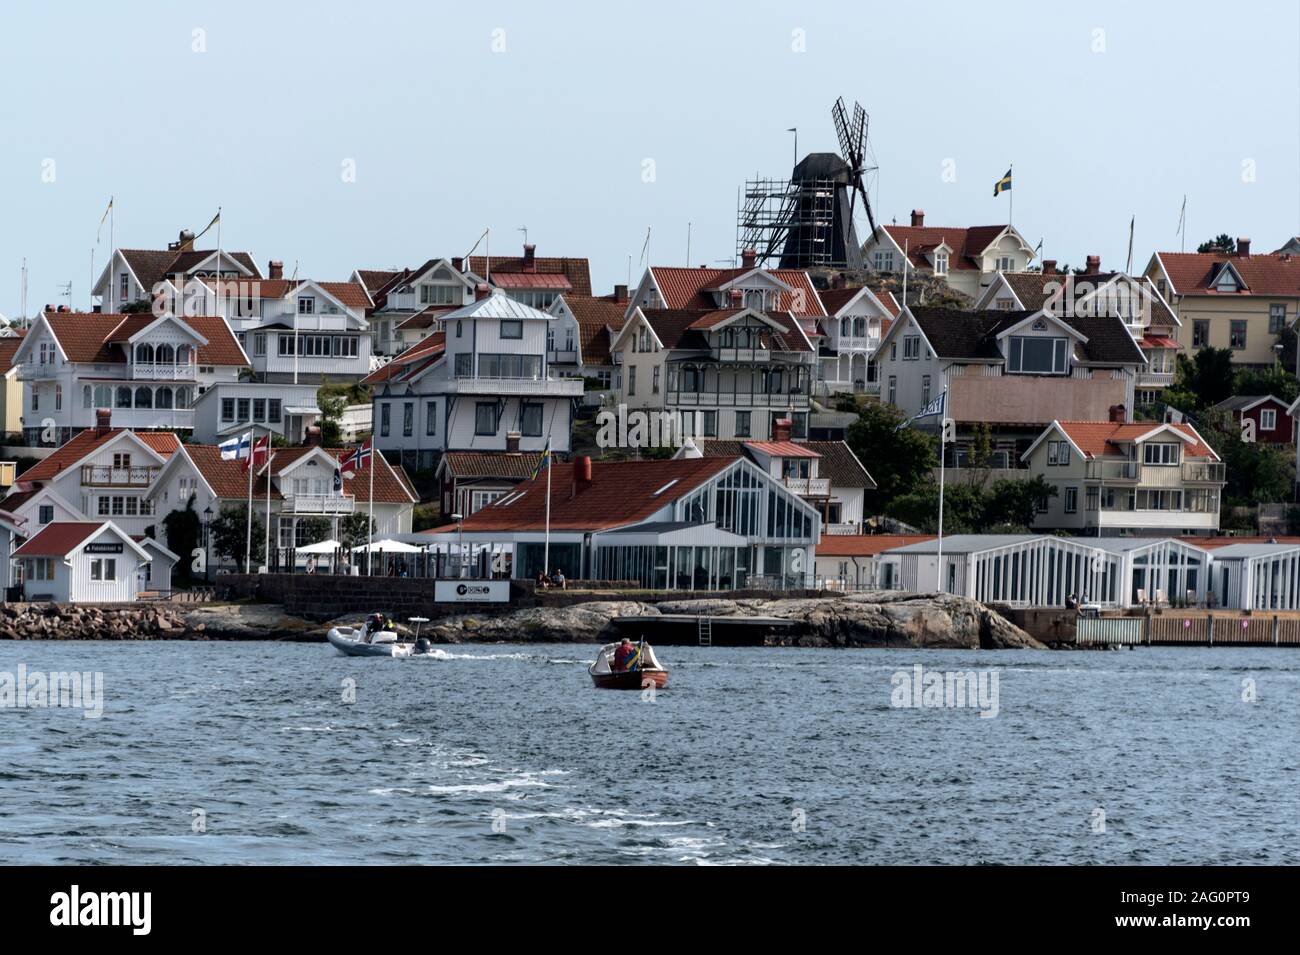 Skyline of Fiskebackskil, a small former fishing village on the shore of the Gullmarn fjord in the Lysekil Municipality of Vastra Gotaland County in w Stock Photo